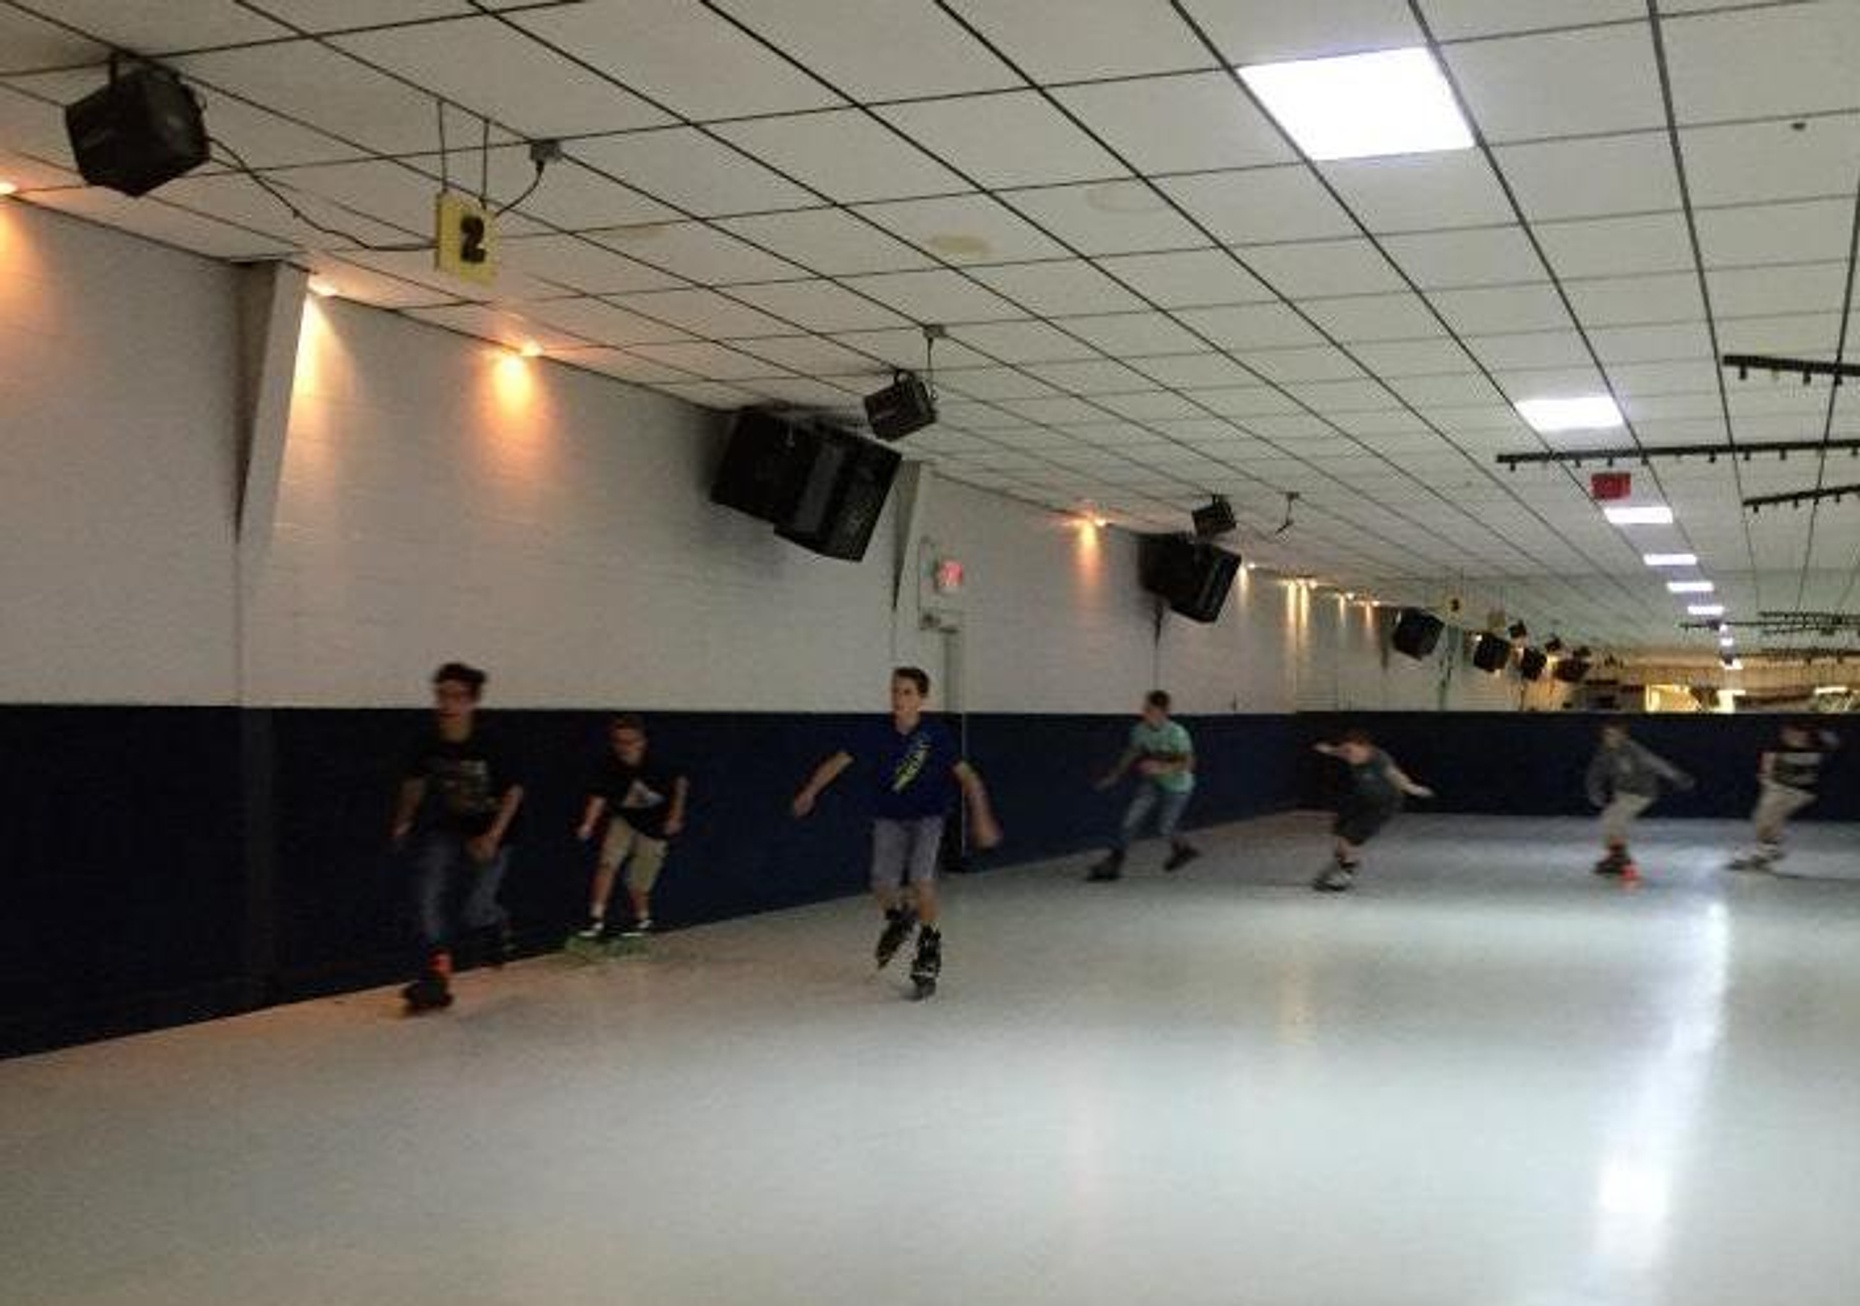 Deluxe Skating Session in Hutchinson Kansas